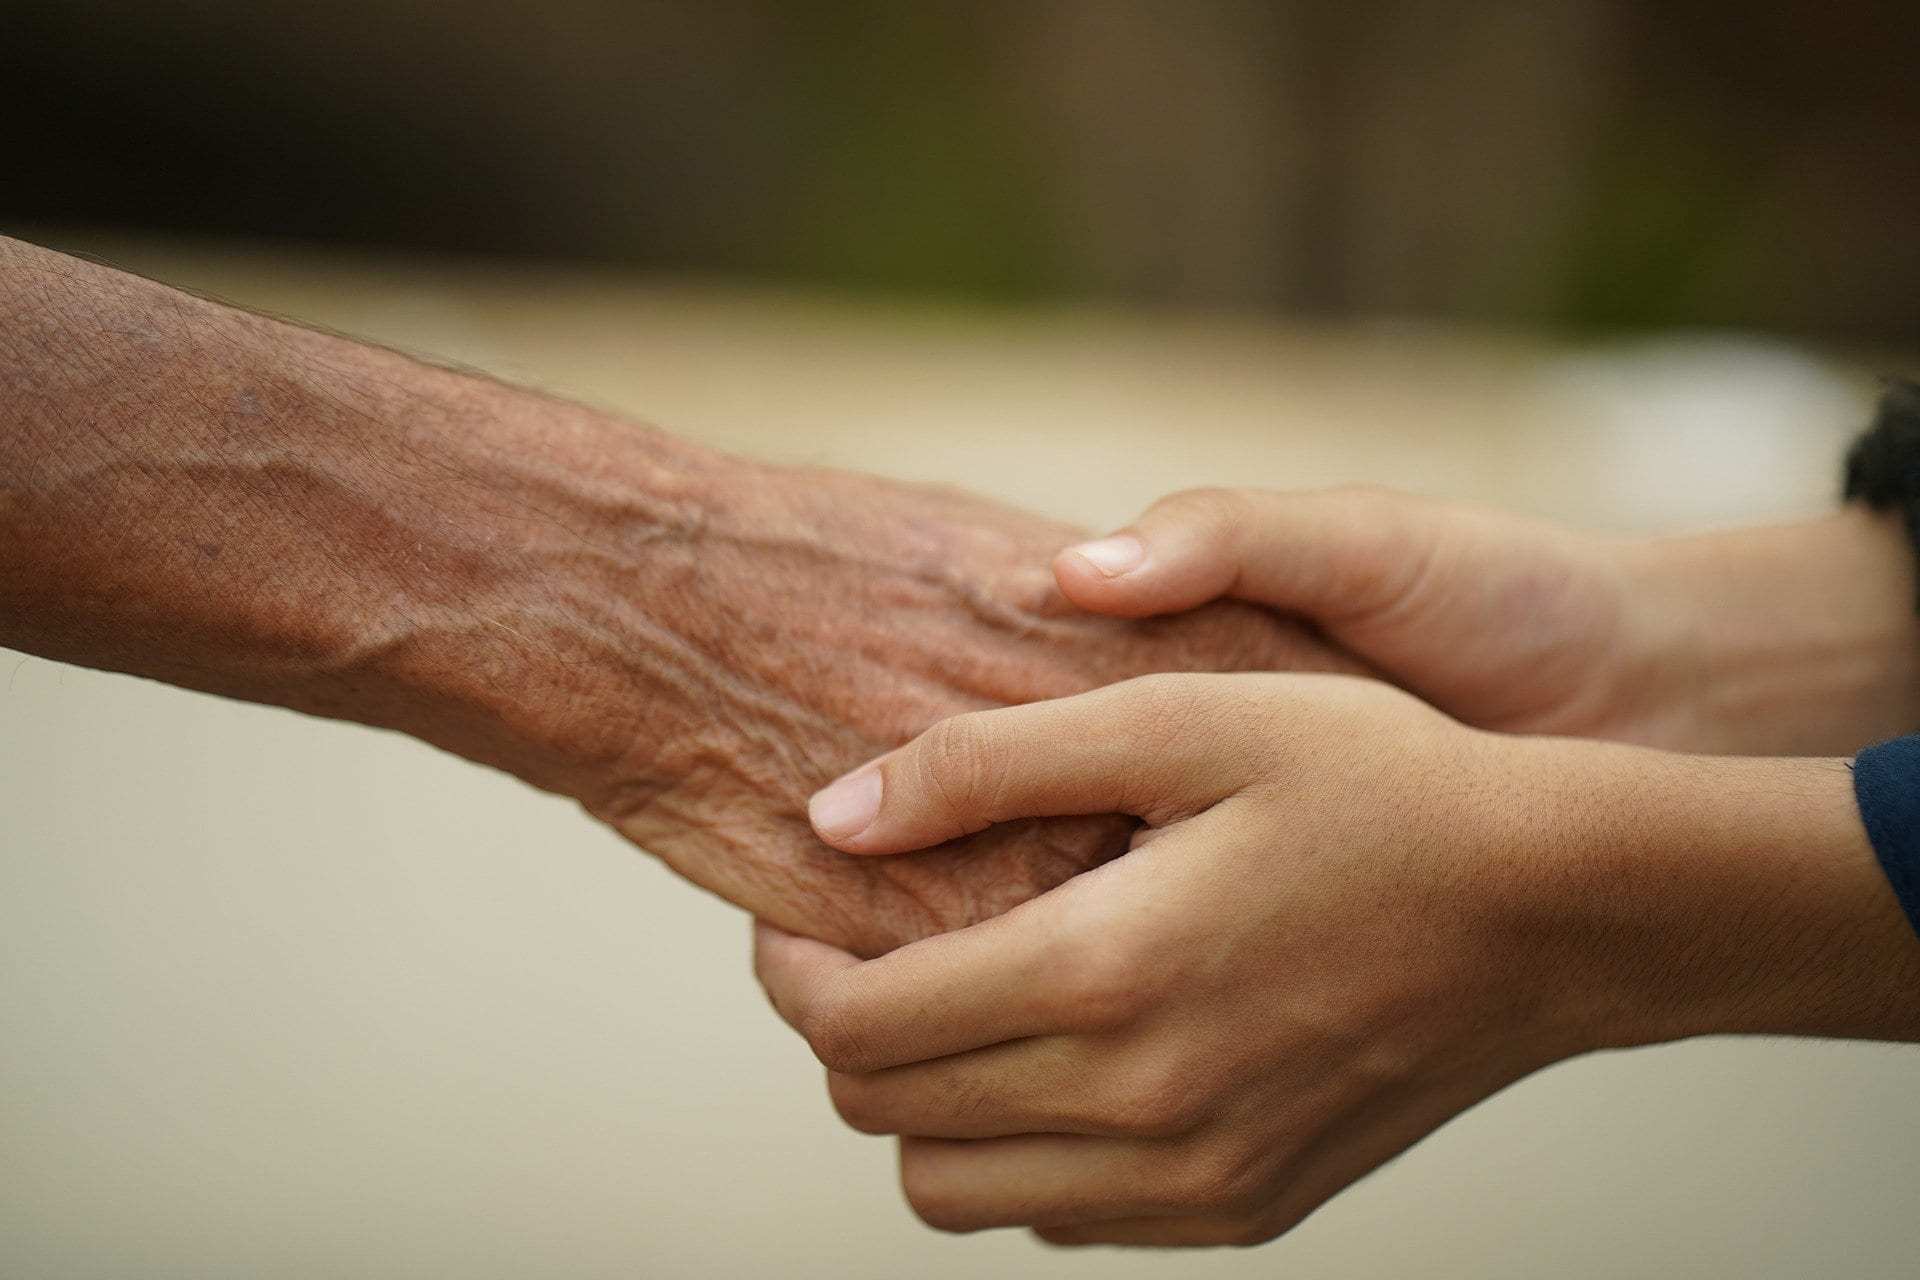 A young person's hands take those of an older person